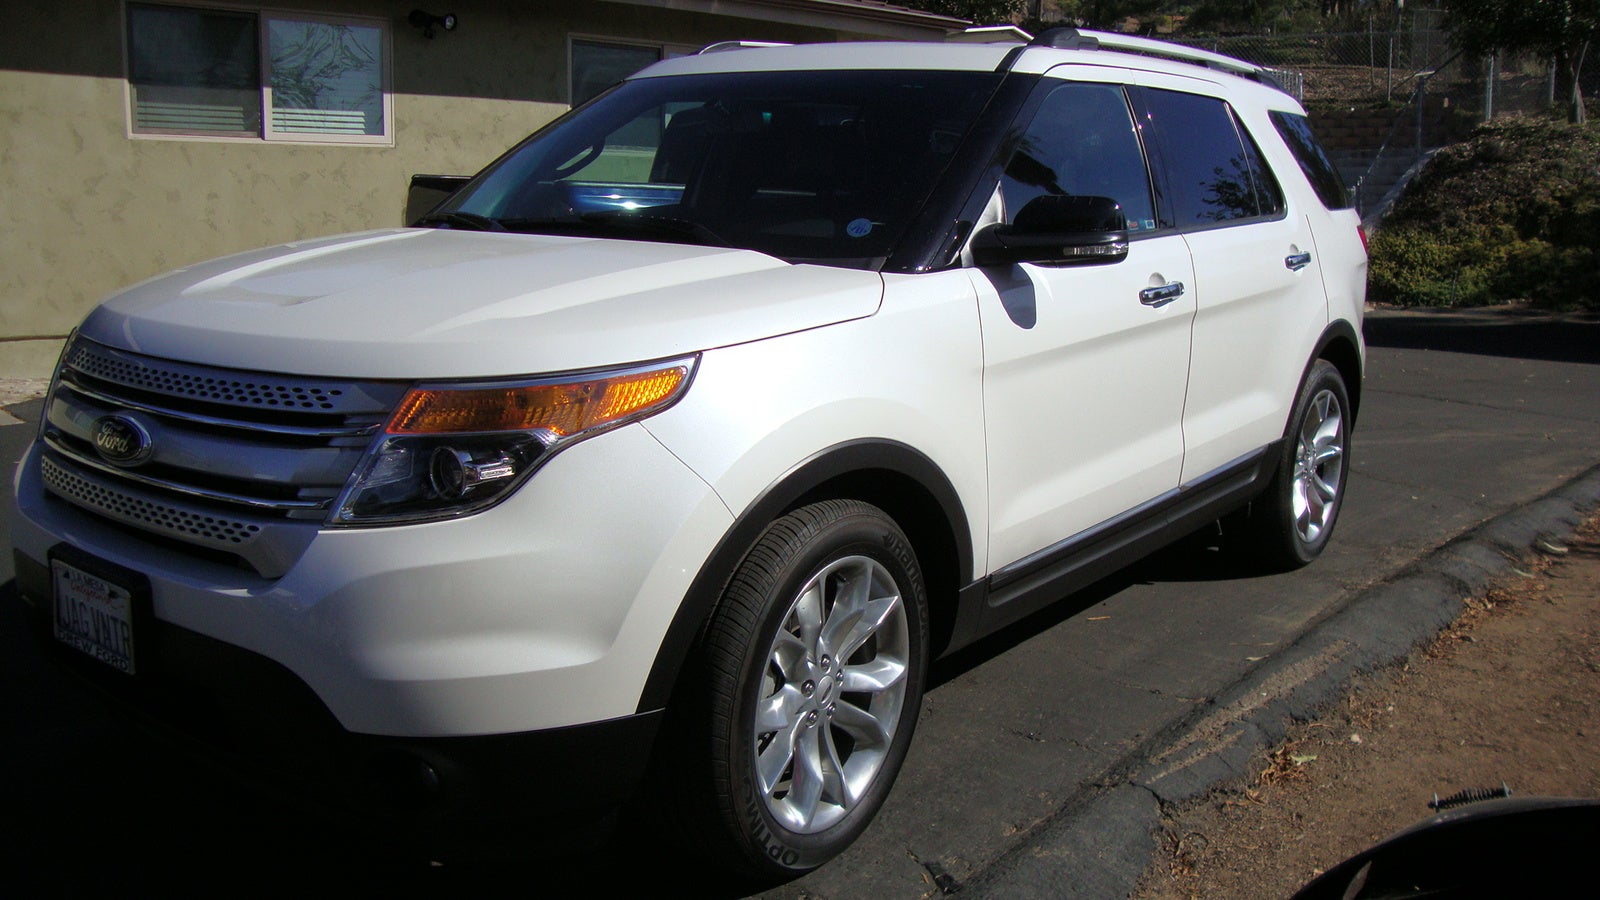 New 2015 \/ 2016 Ford Explorer For Sale  CarGurus